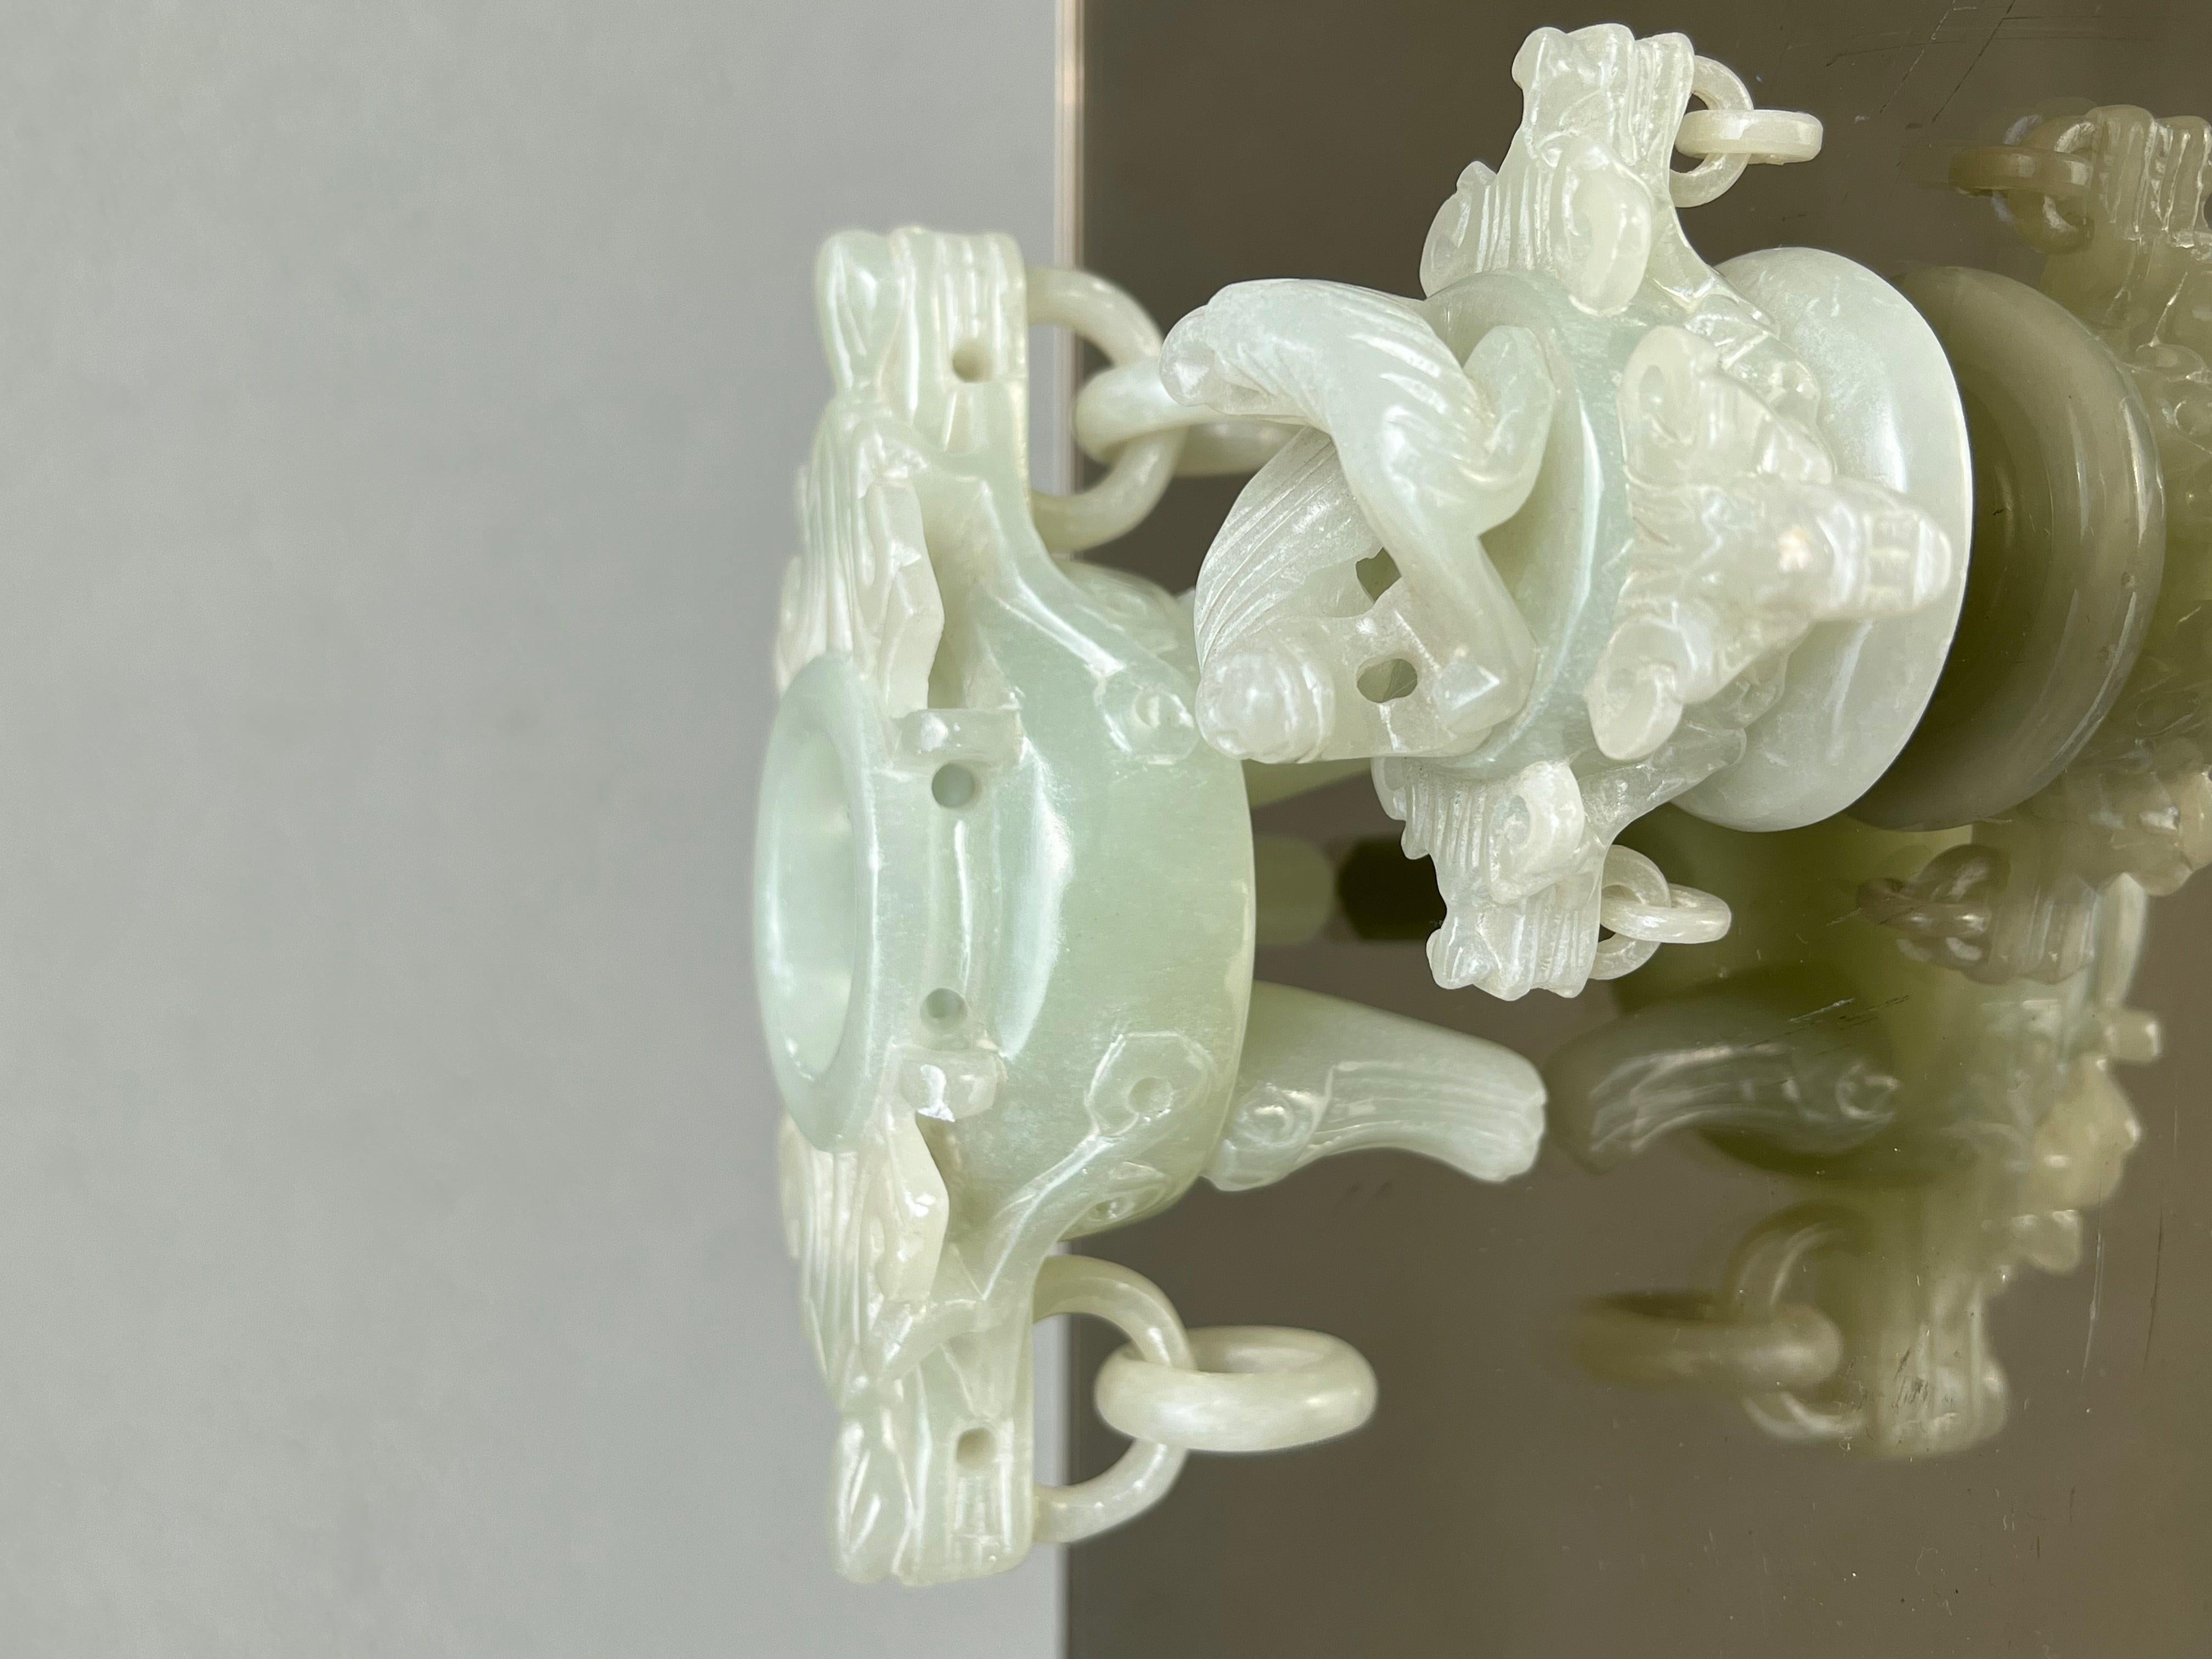 Jade Incensiere in Giadite Cinese, Chinese Art, Chinese Design, XX Secolo 